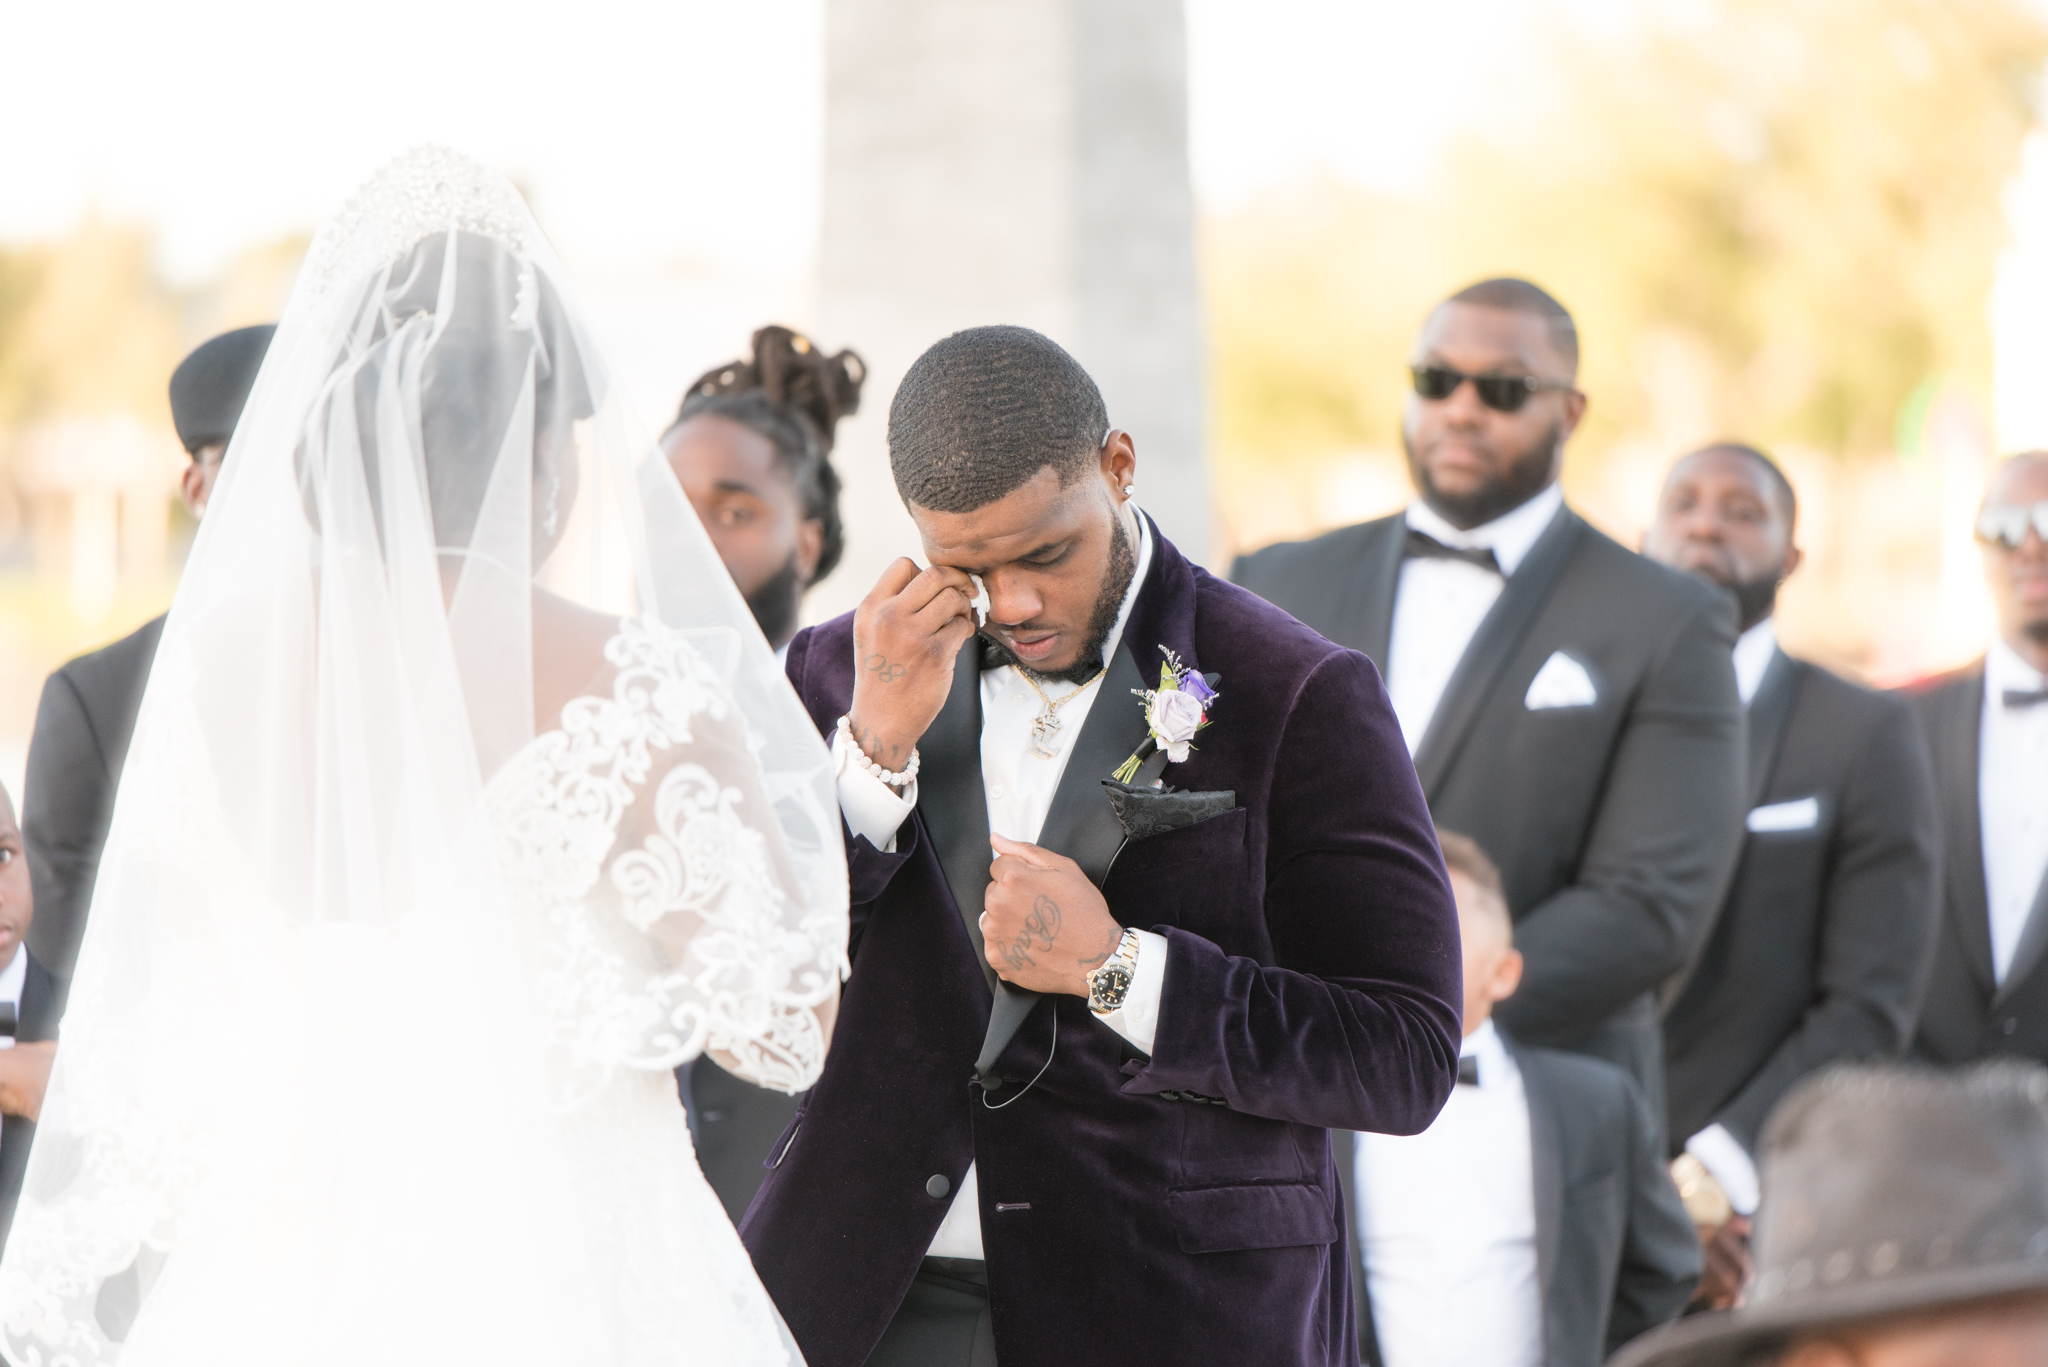 Groom cries during wedding ceremony.